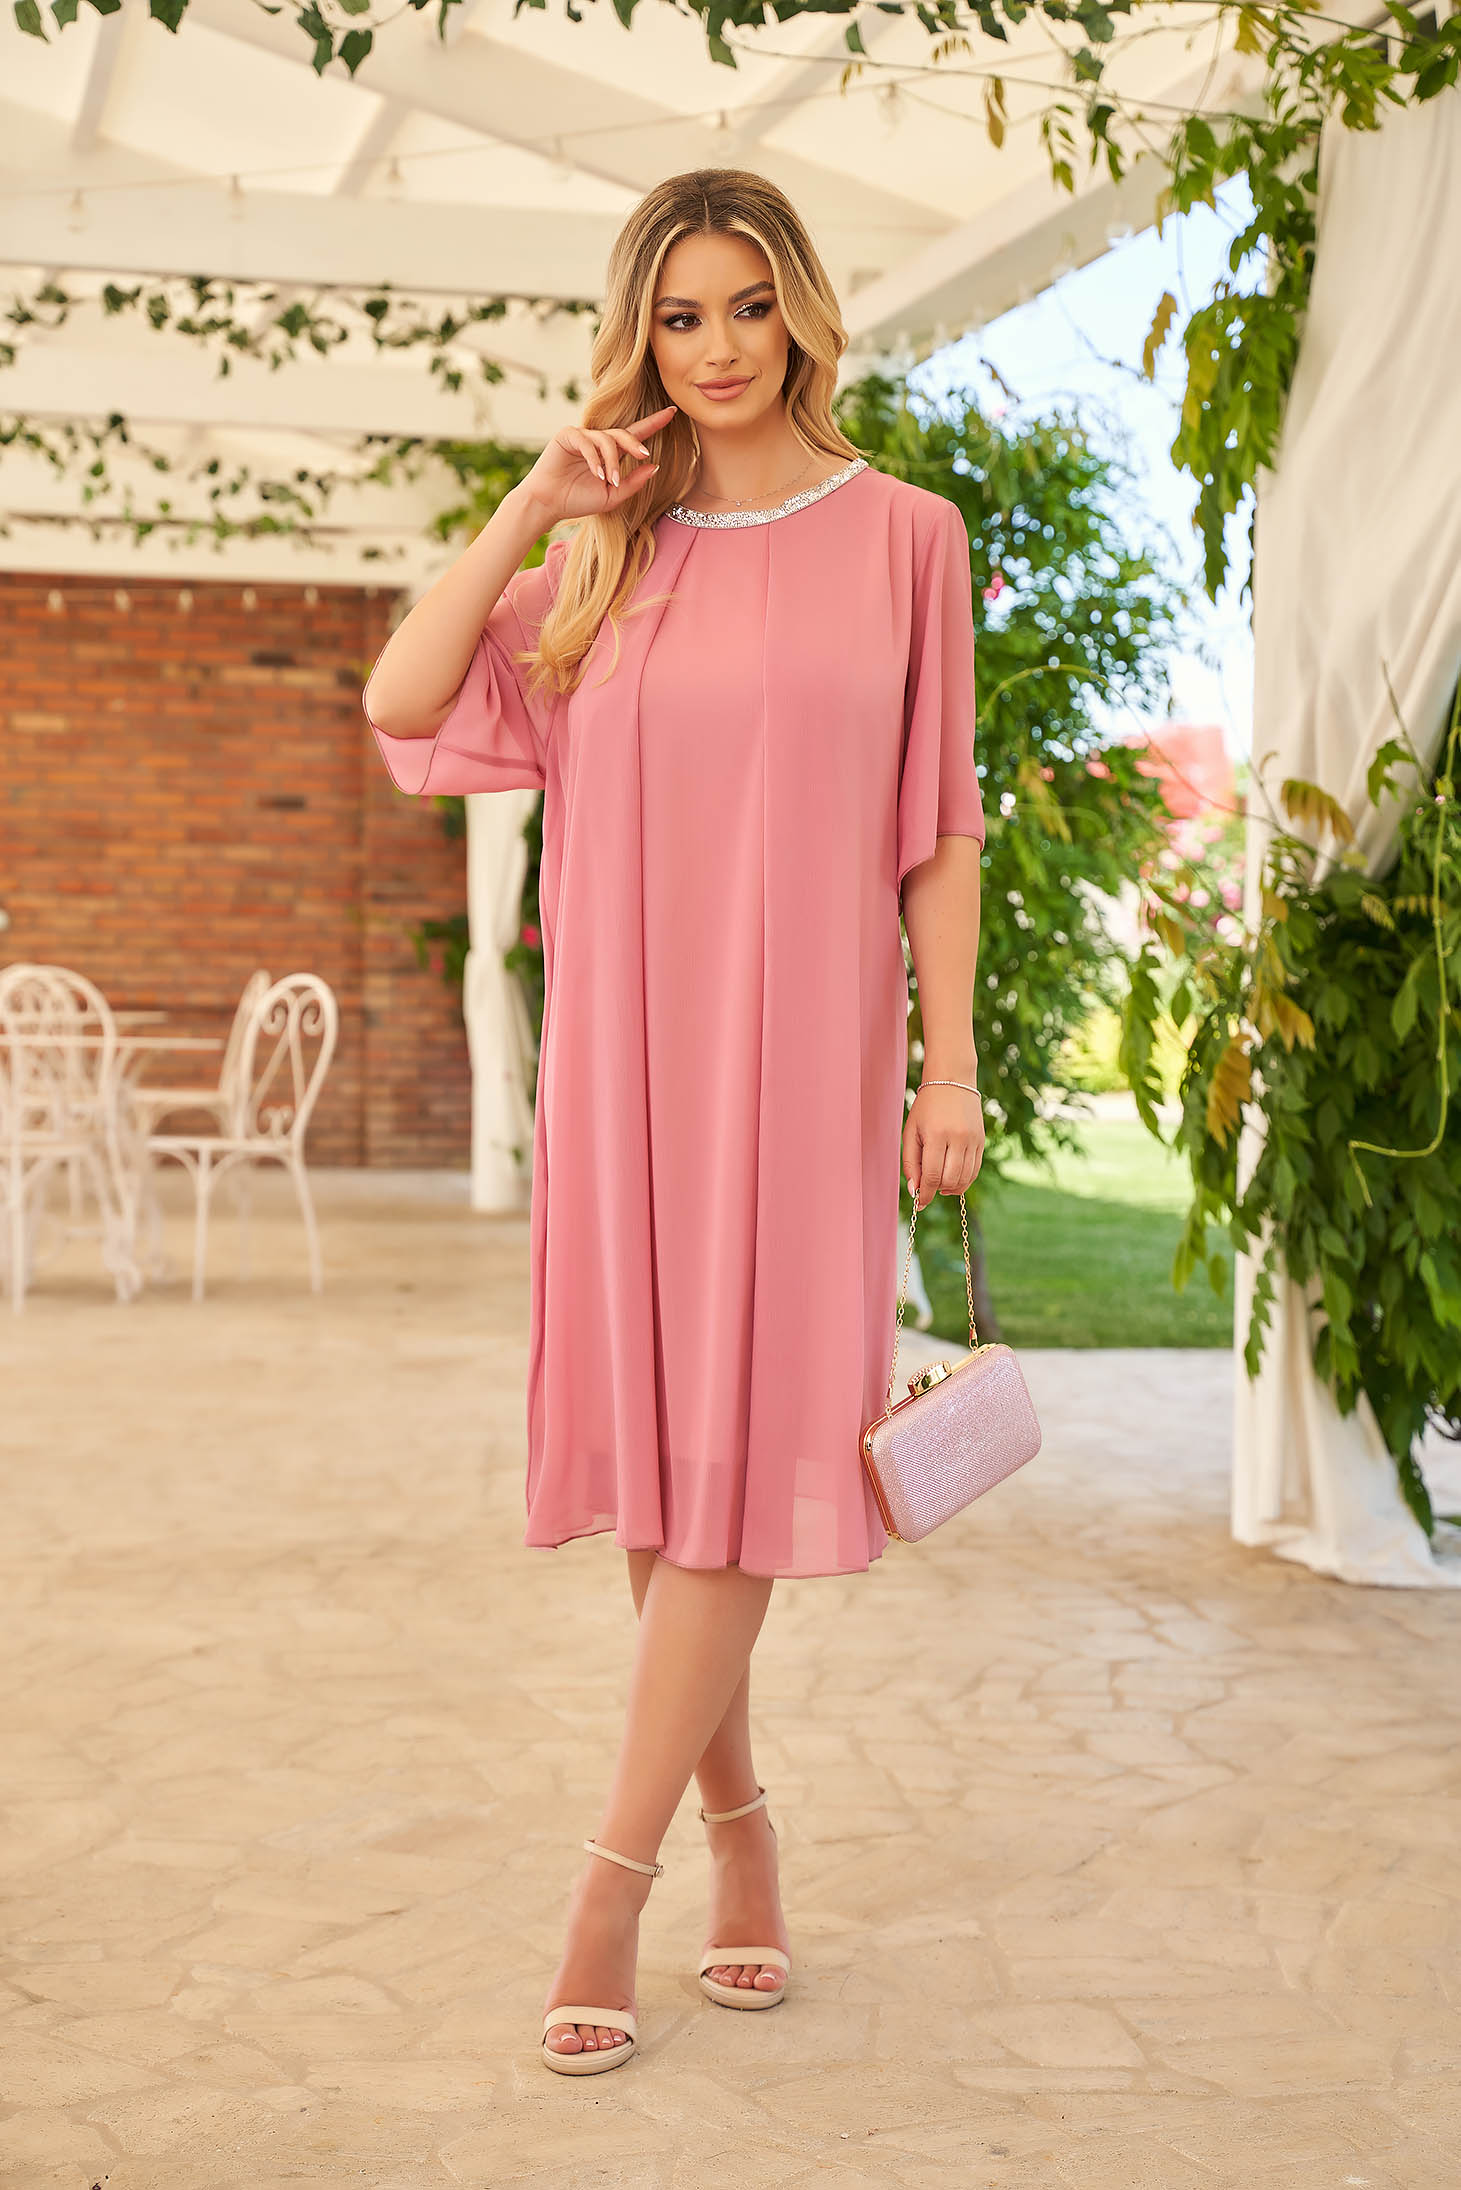 Pink dress loose fit midi with embellished accessories from veil fabric